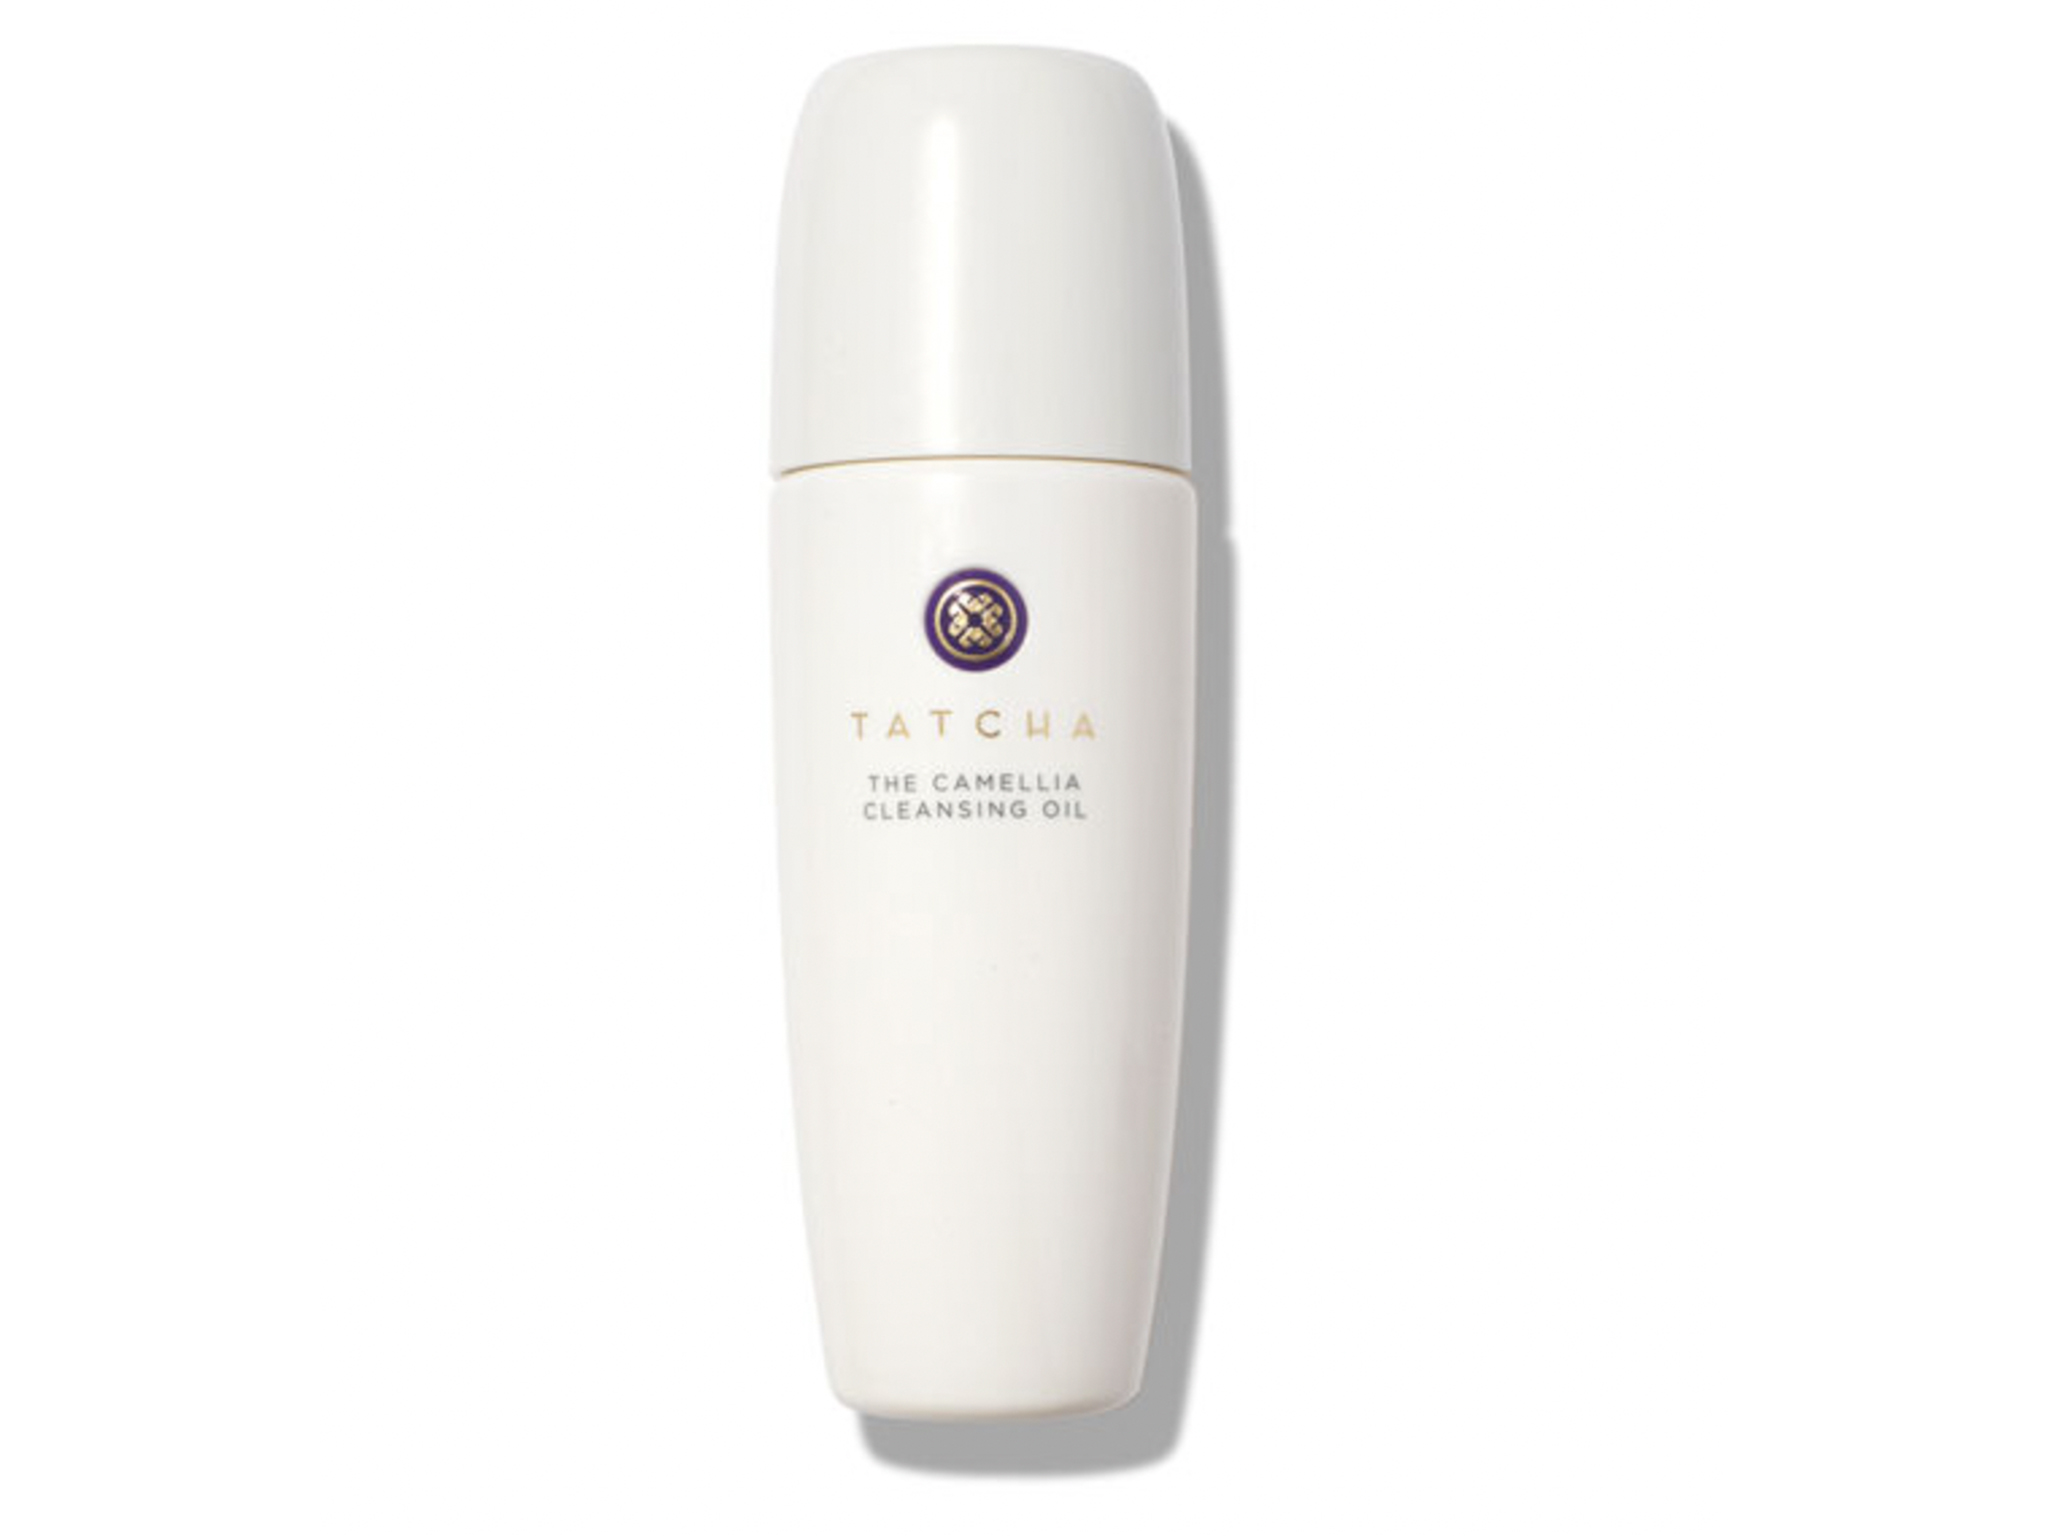 Tatcha camellia cleansing oil